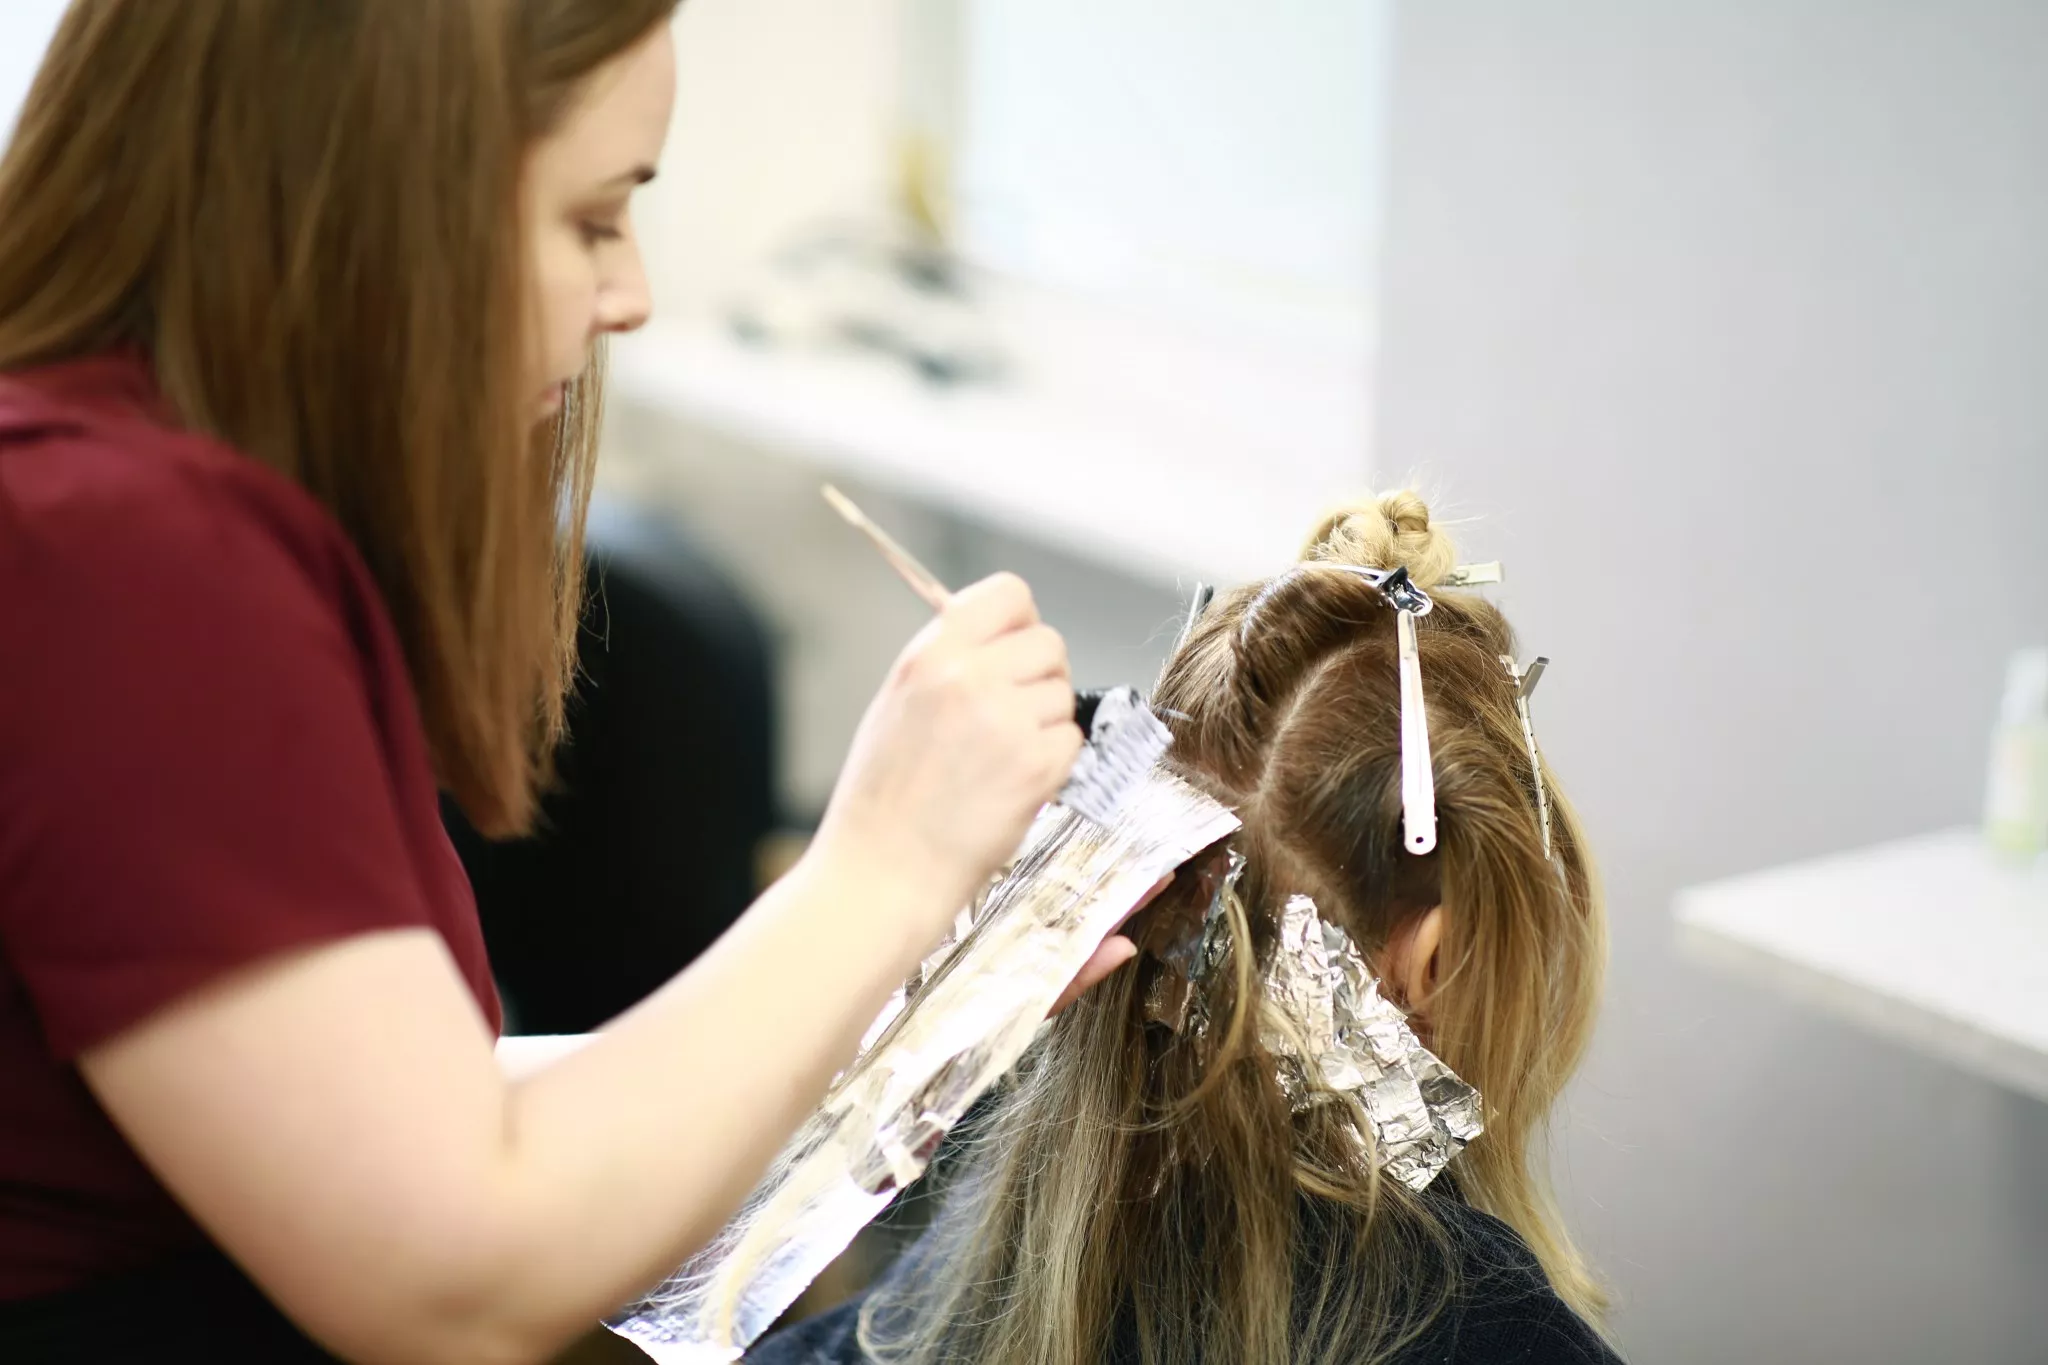 Rachael carefully colouring the hair of a female client as part of her stylists role